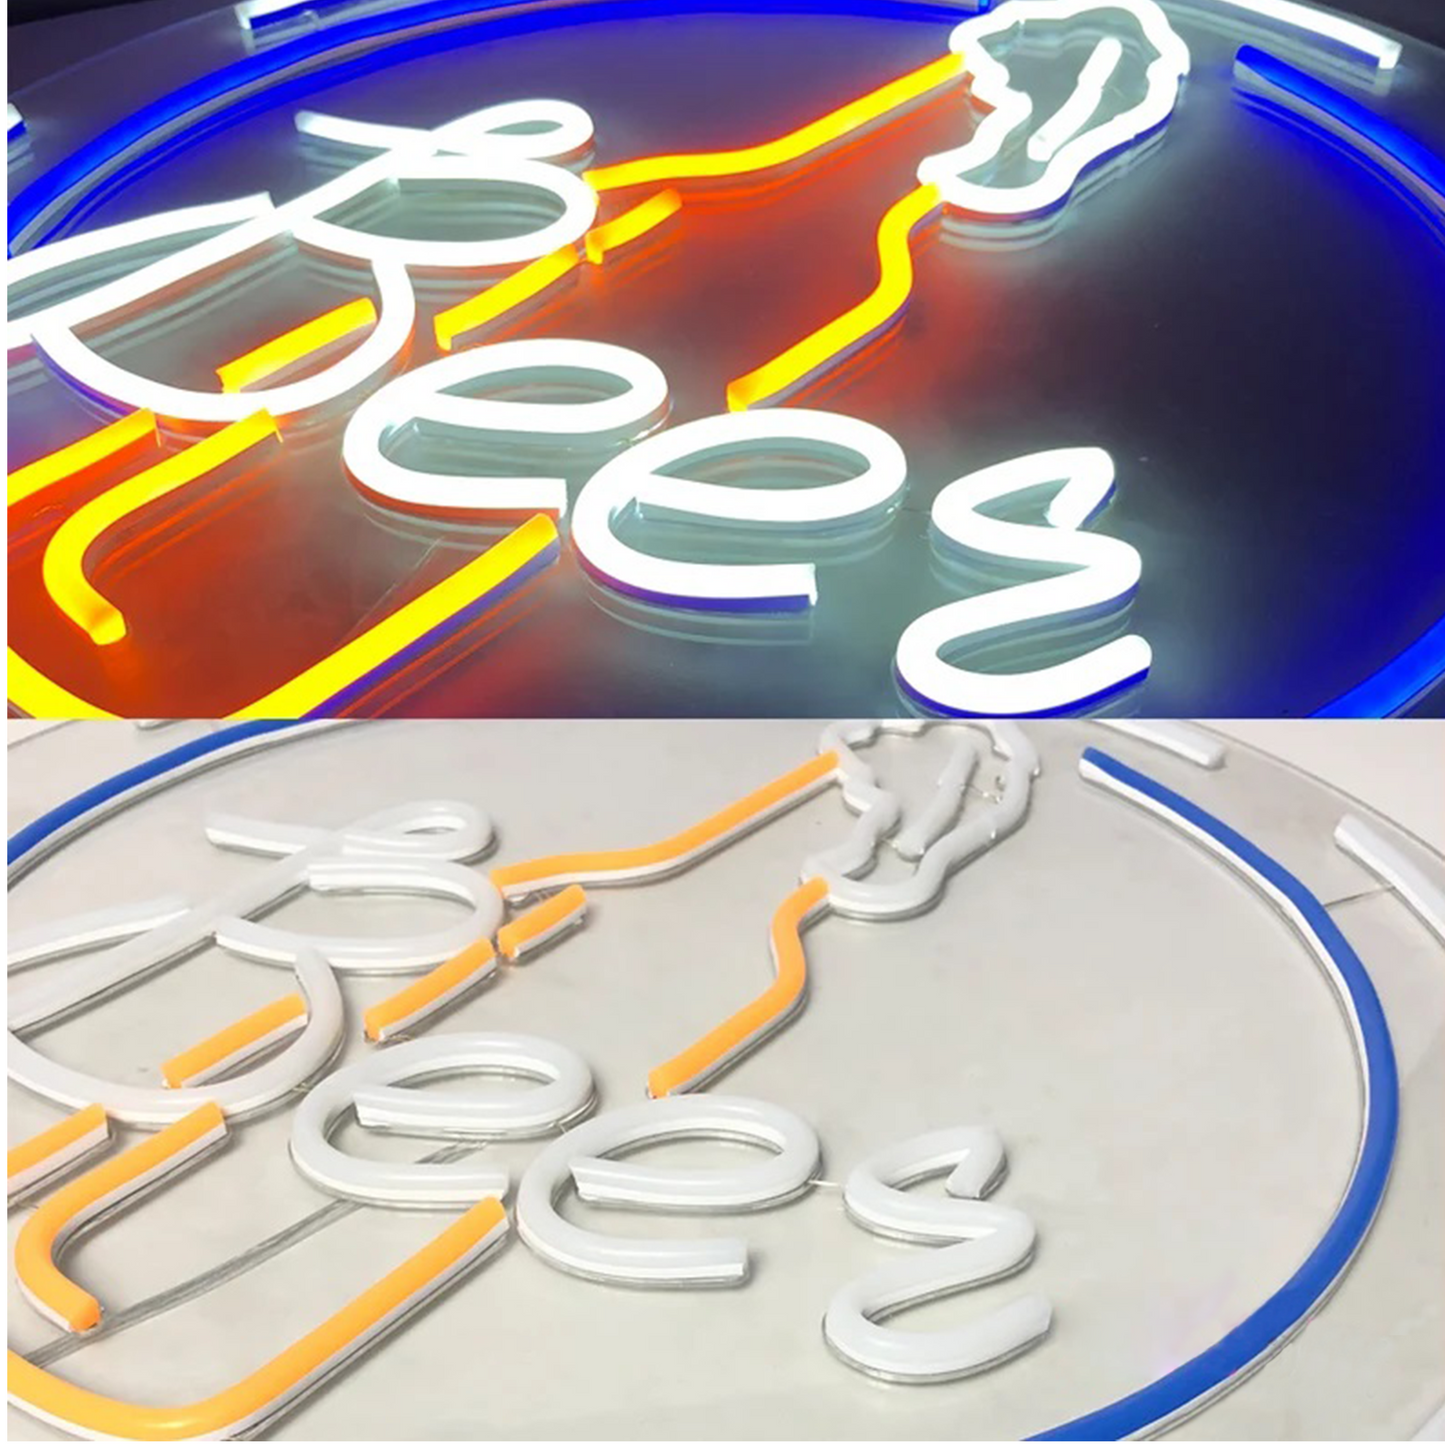 20-beer-neon-sign-neon-bar-sign-home-pub-signs-bar-wall-decoration-neon-art-home-wall-party-decoration